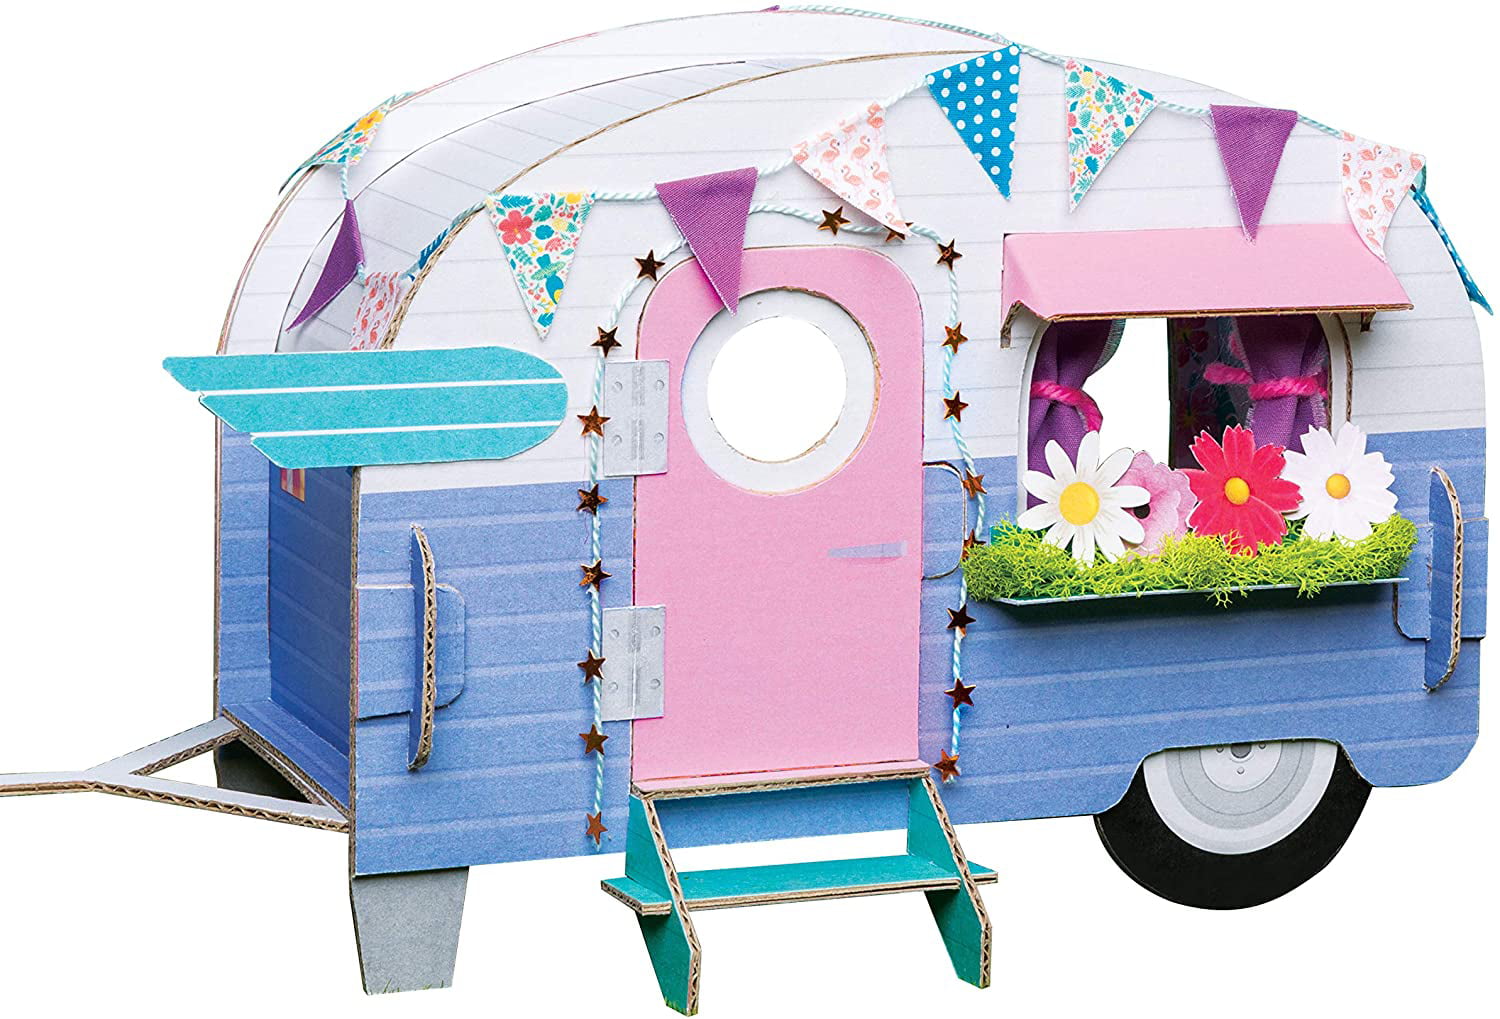 Make Your Own Tiny Camper by Editors of Klutz Hardcover